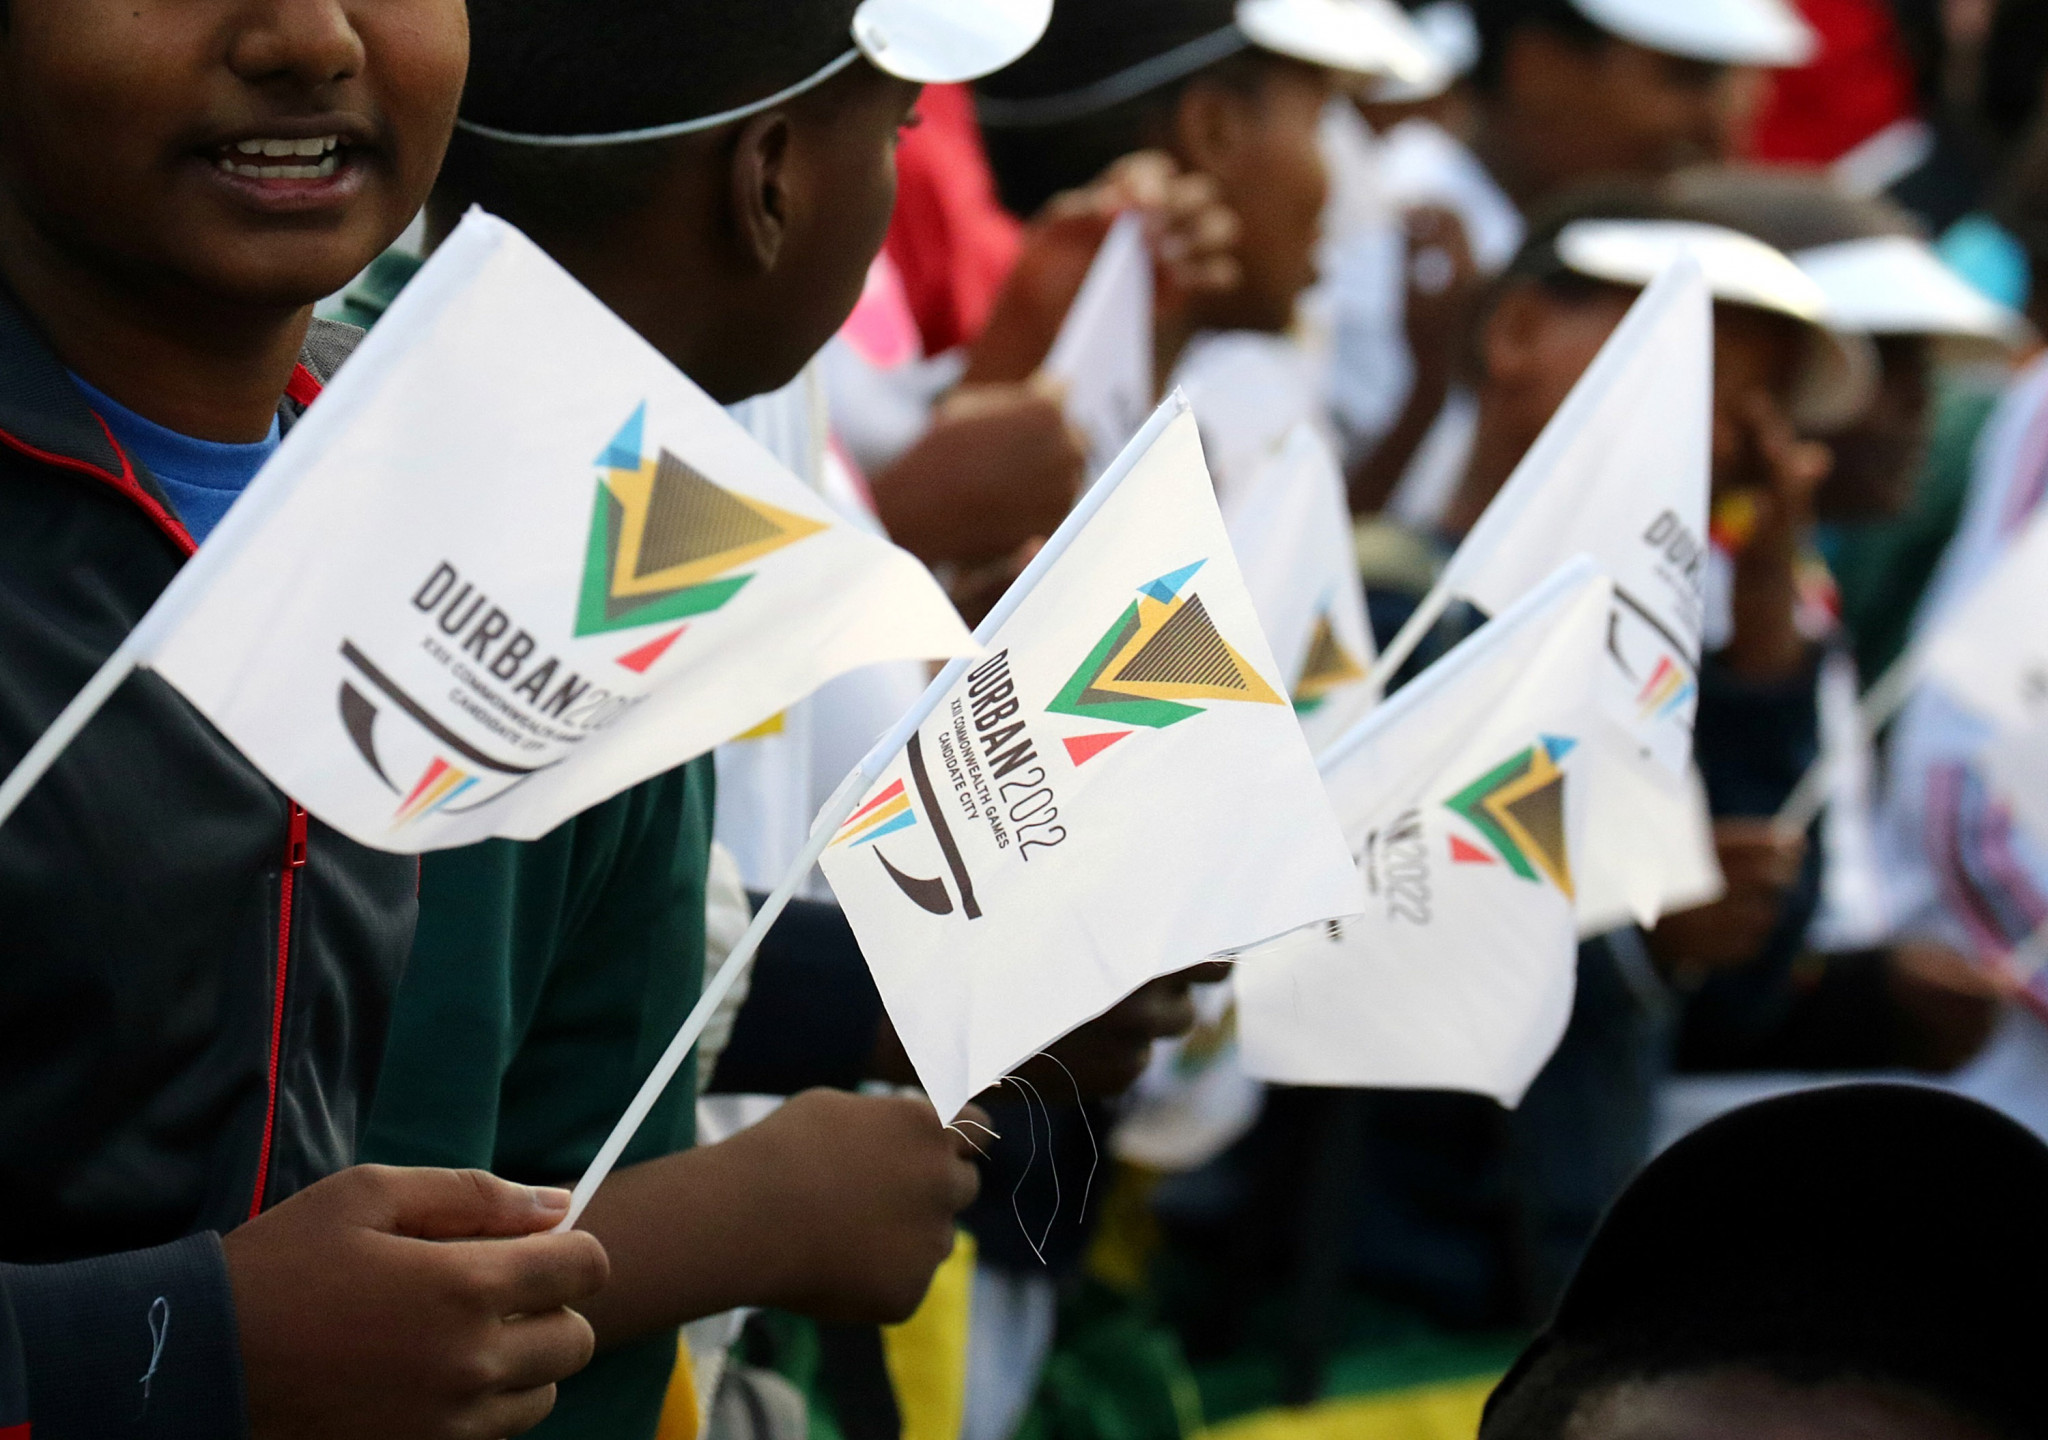 Durban had initially been awarded the 2022 Commonwealth Games but failed to deliver on bid commitments ©Getty Images